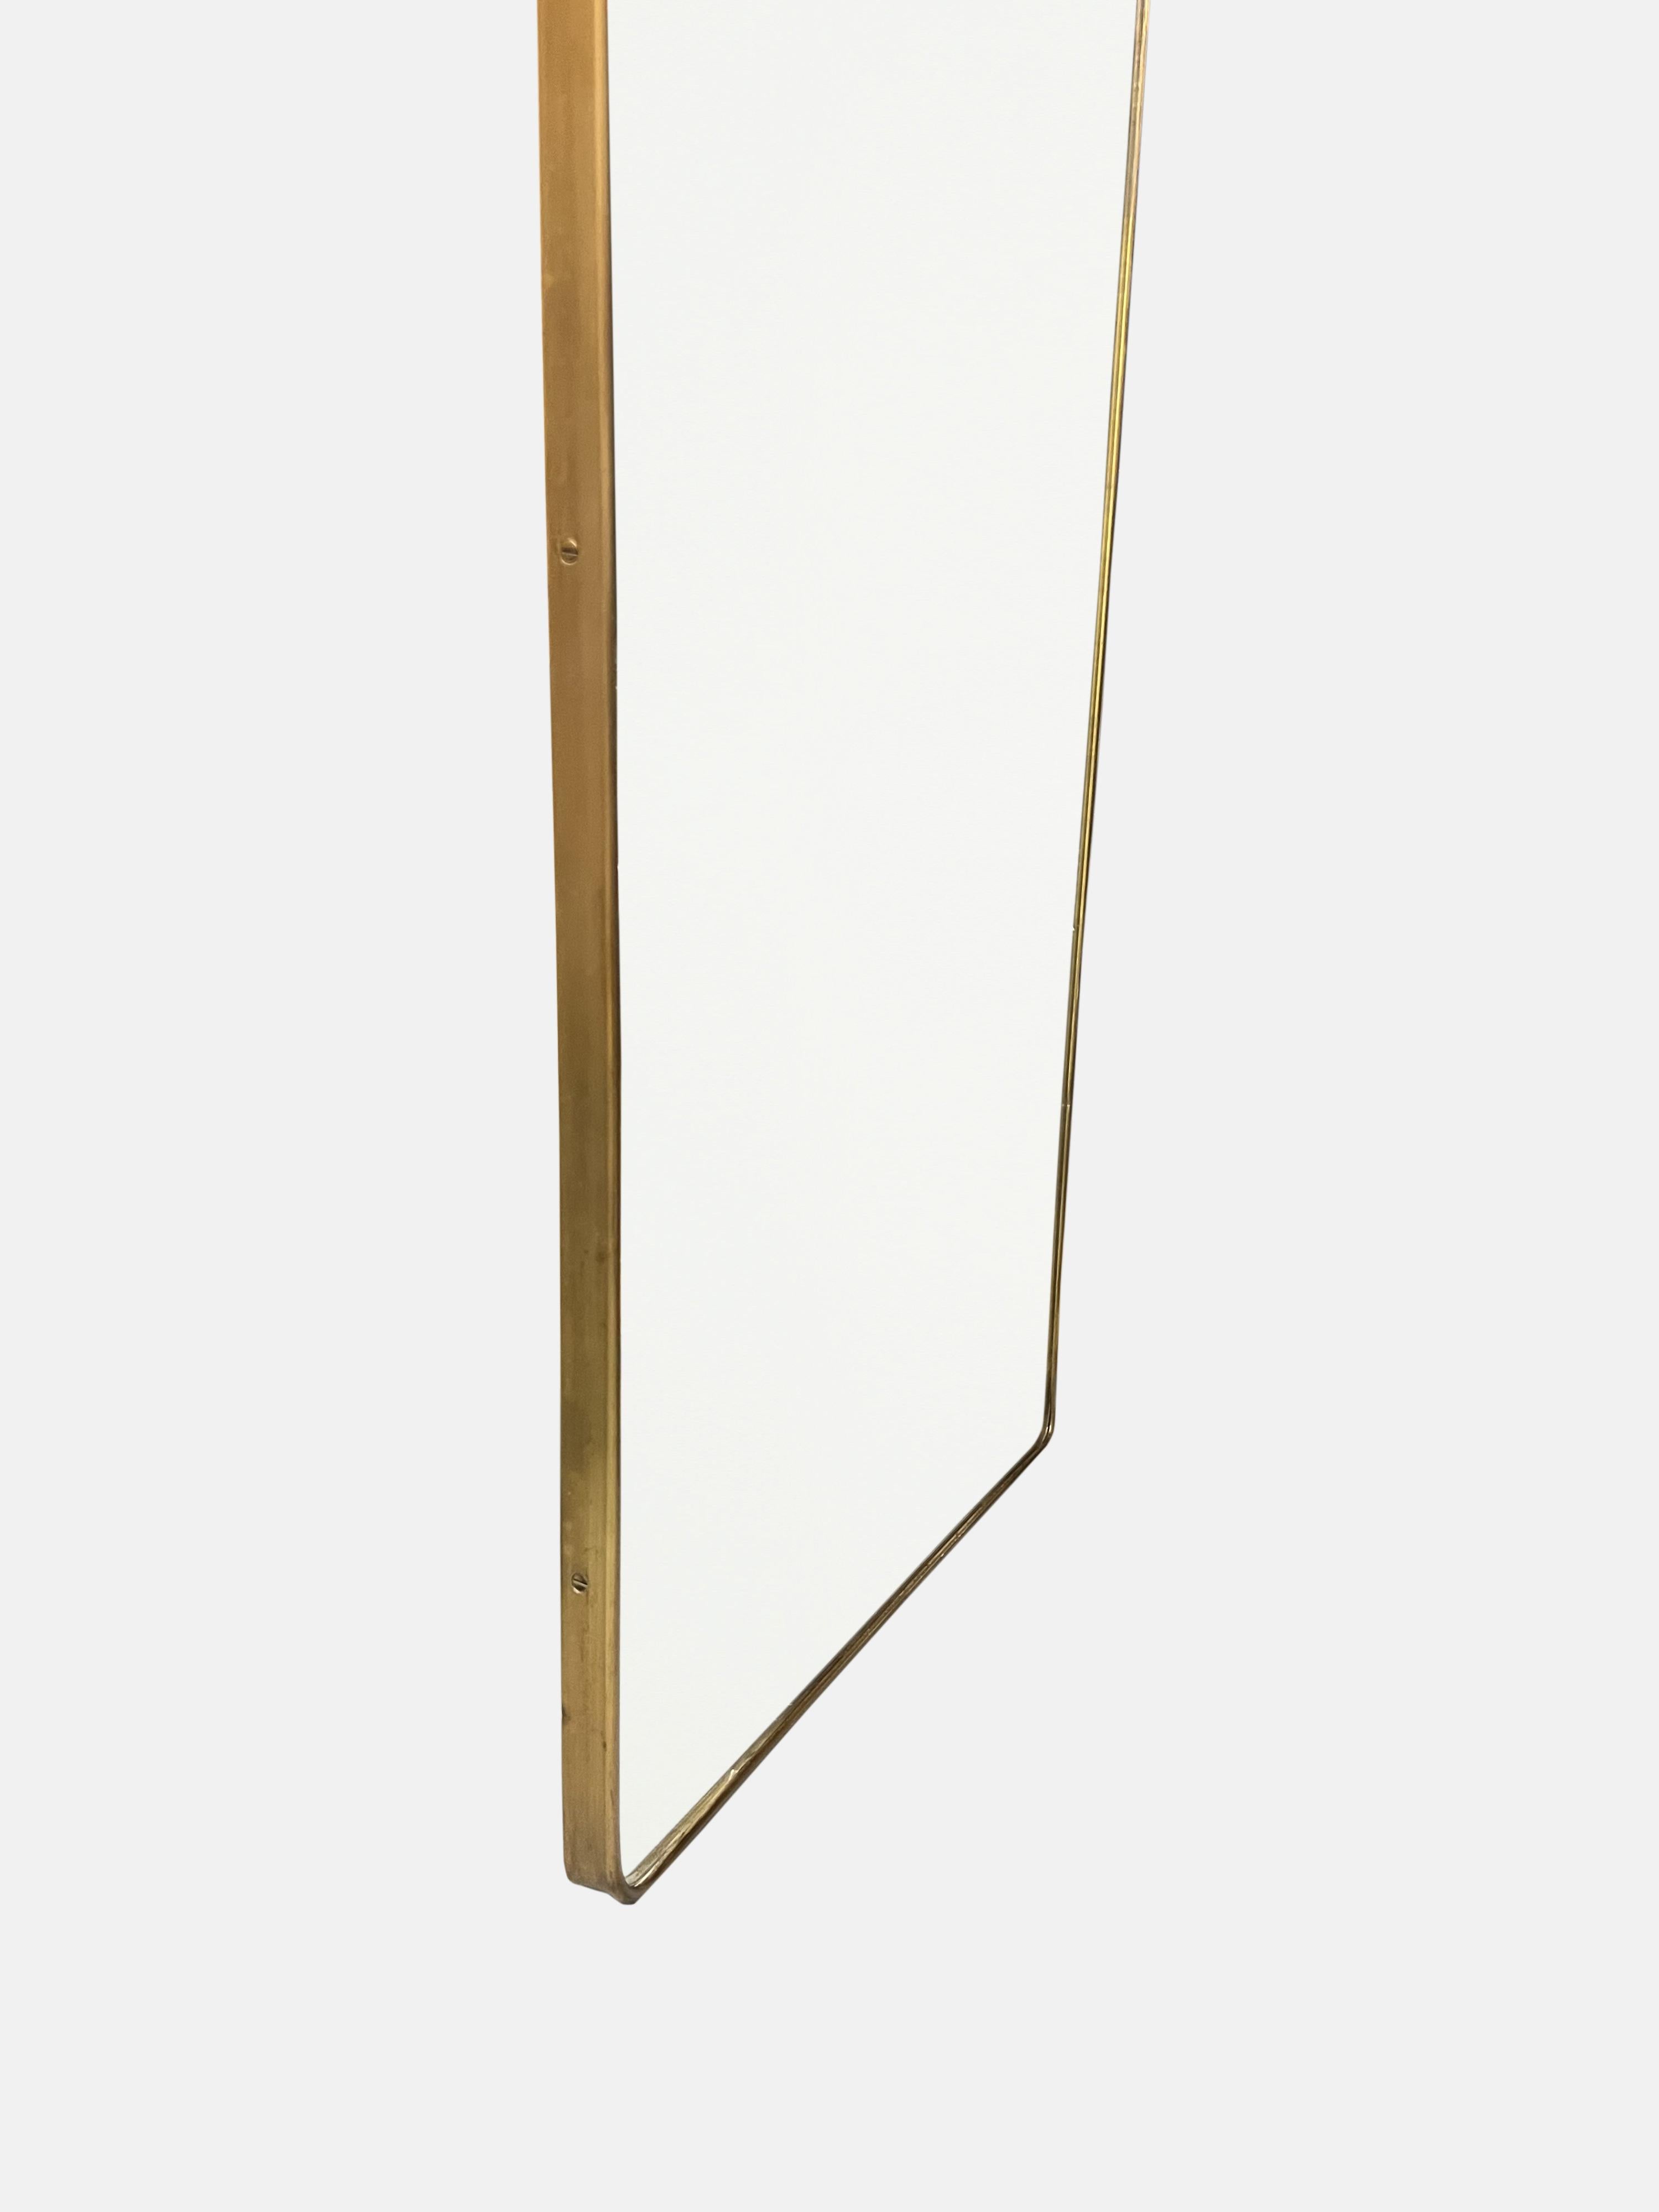 1950s Italian Modernist Grand Scale Shaped Brass Wall Mirror For Sale 4